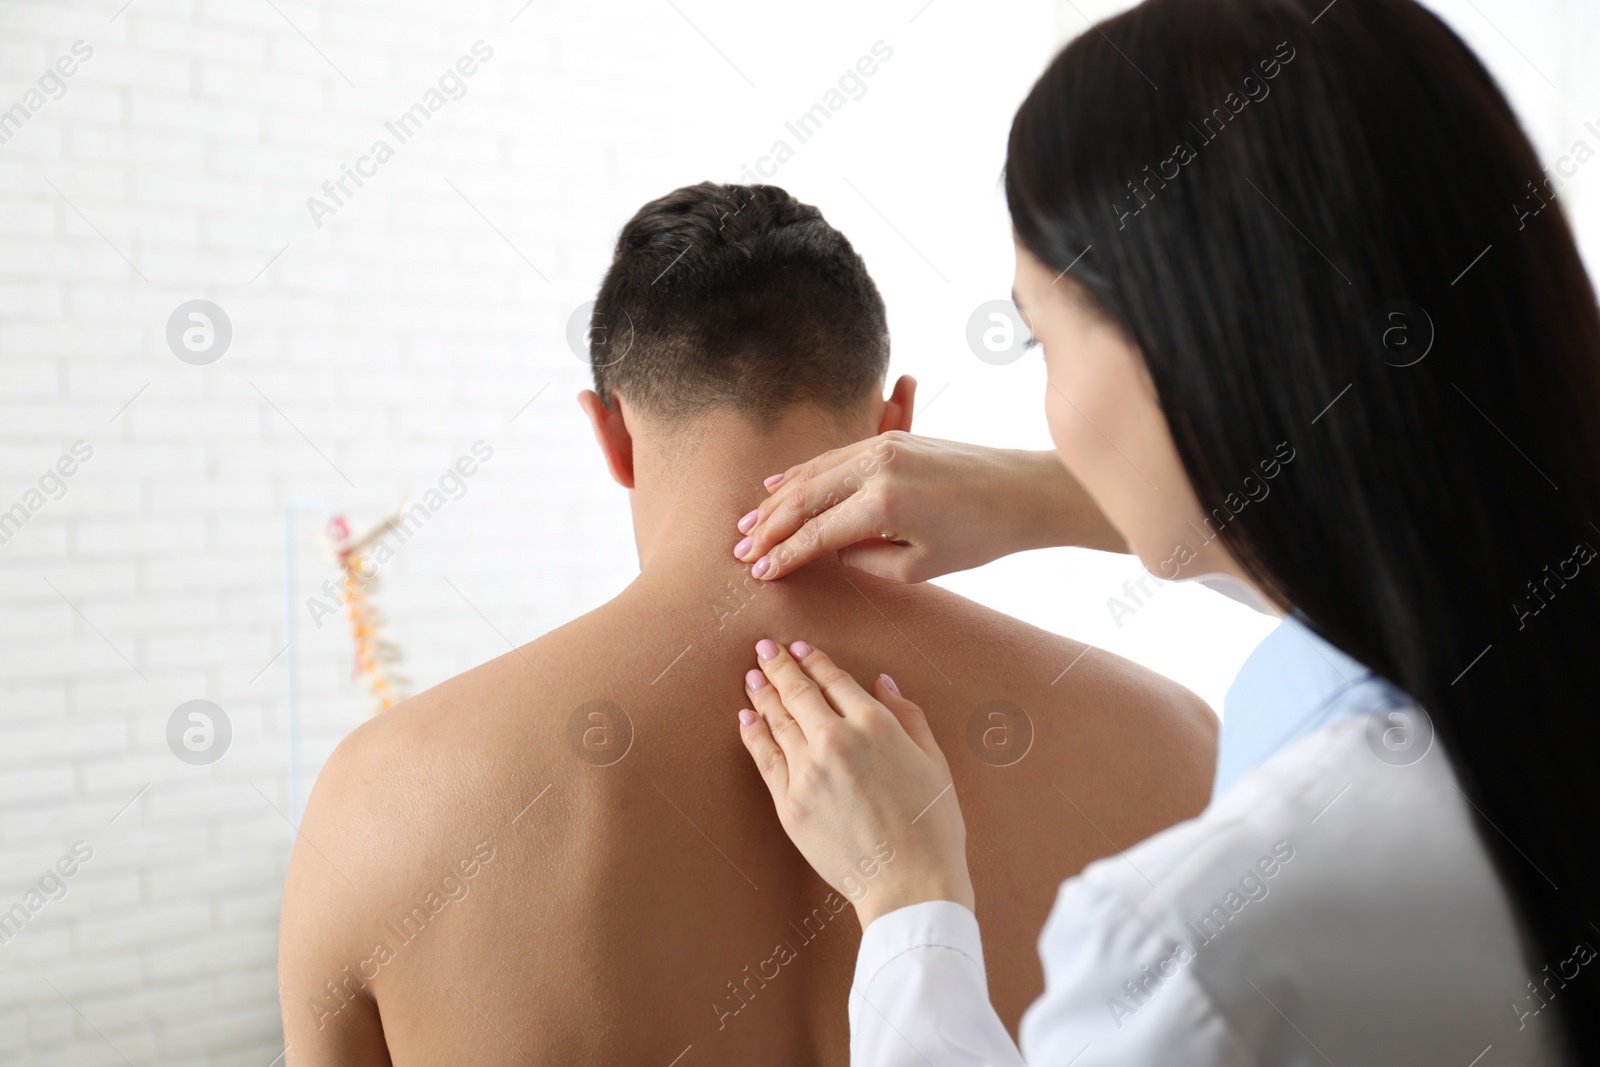 Photo of Professional orthopedist examining man in medical office